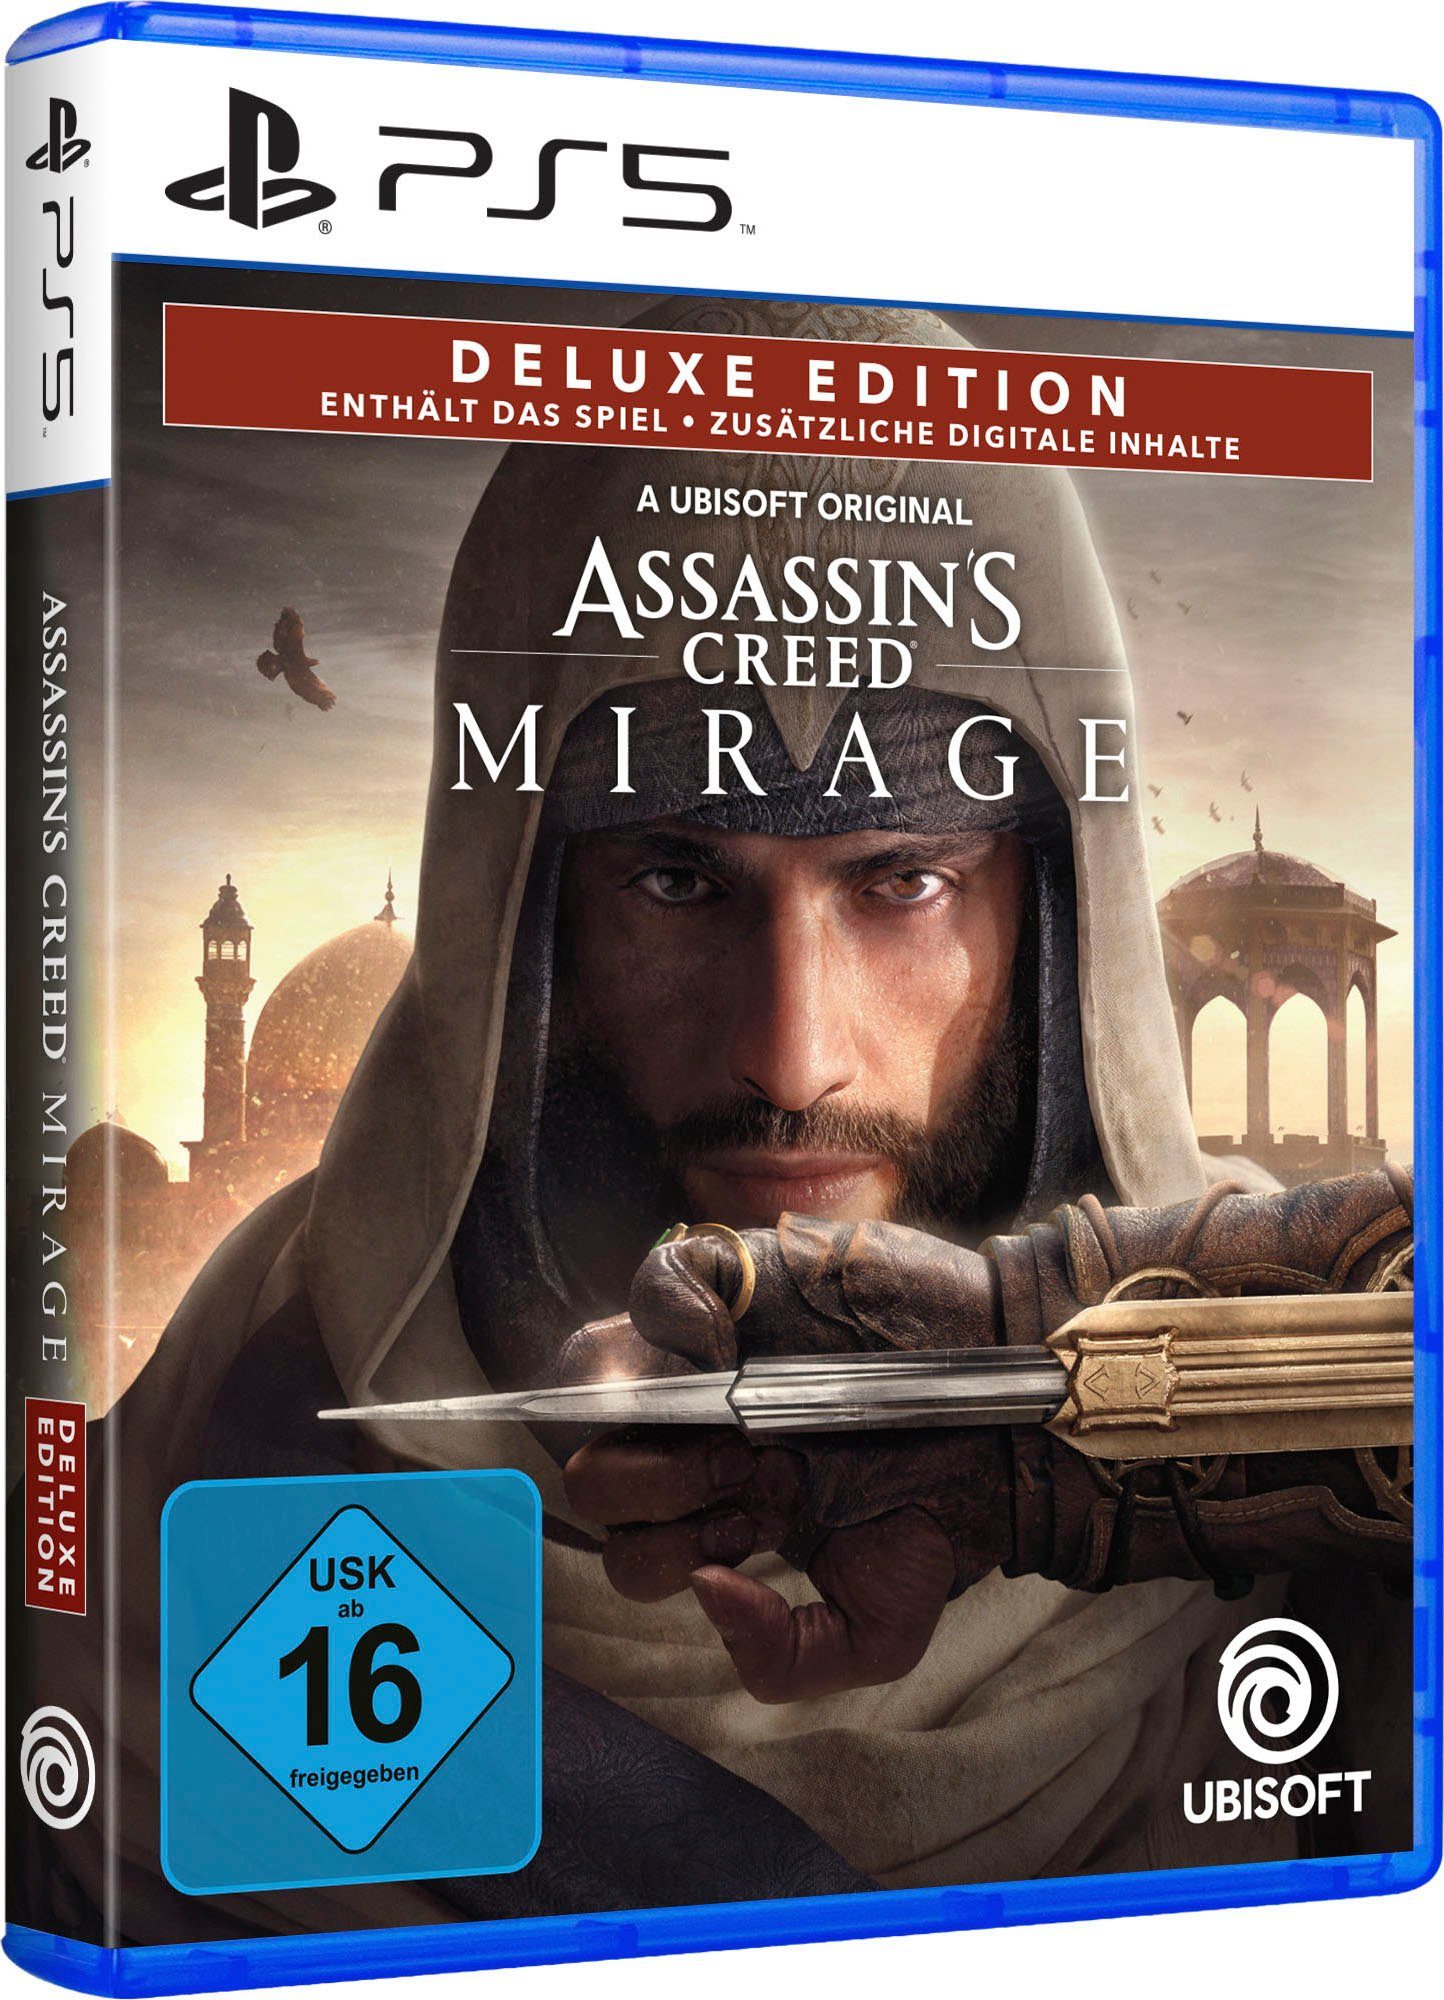 UBISOFT - PlayStation Deluxe Creed 5 Edition Mirage Assassin's